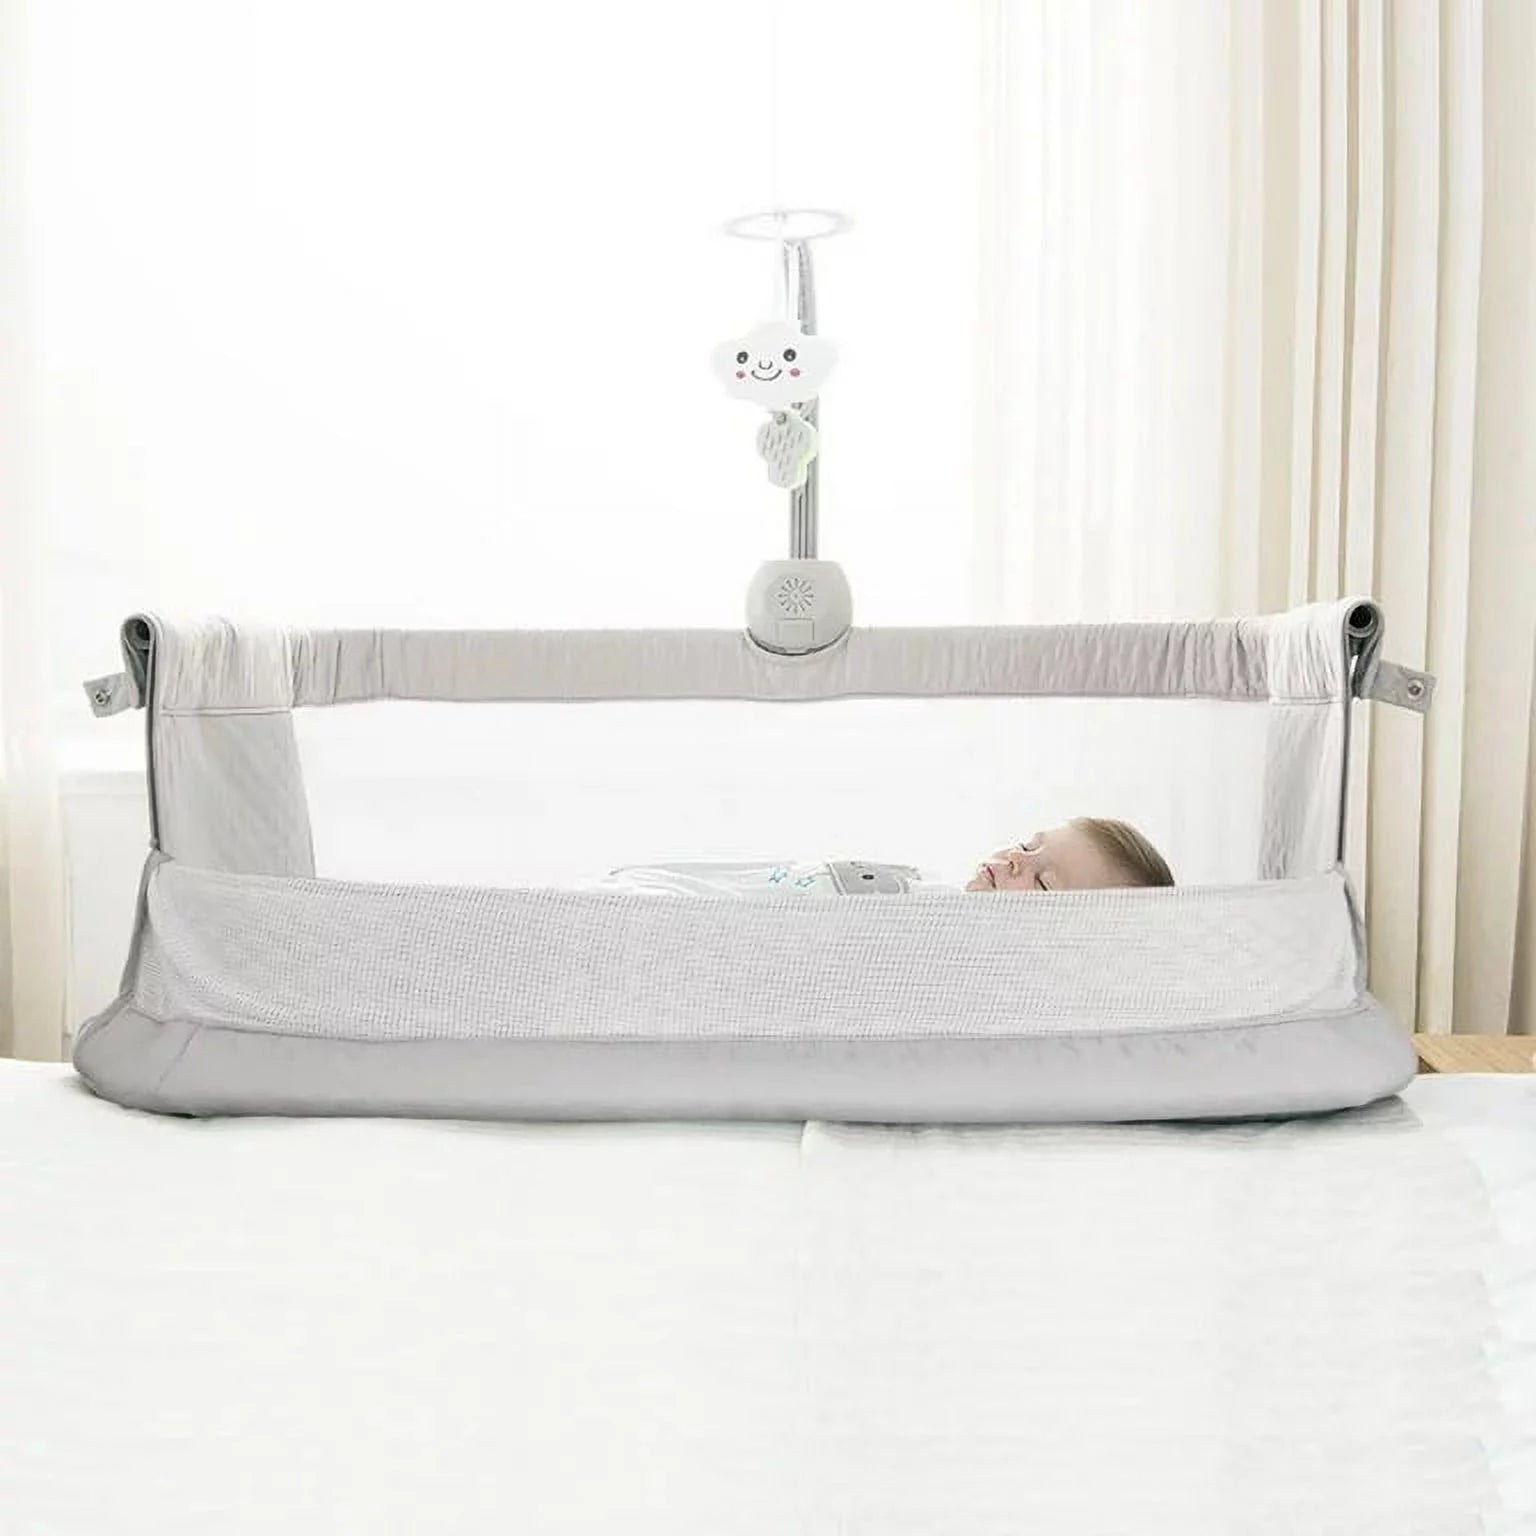 Baby Bassinet, Bedside Sleeper Baby Bed Cribs,Baby Bed to Bed, Newborn Baby Crib,Adjustable Portable Bed for Infant/Baby Boy/Baby Girl